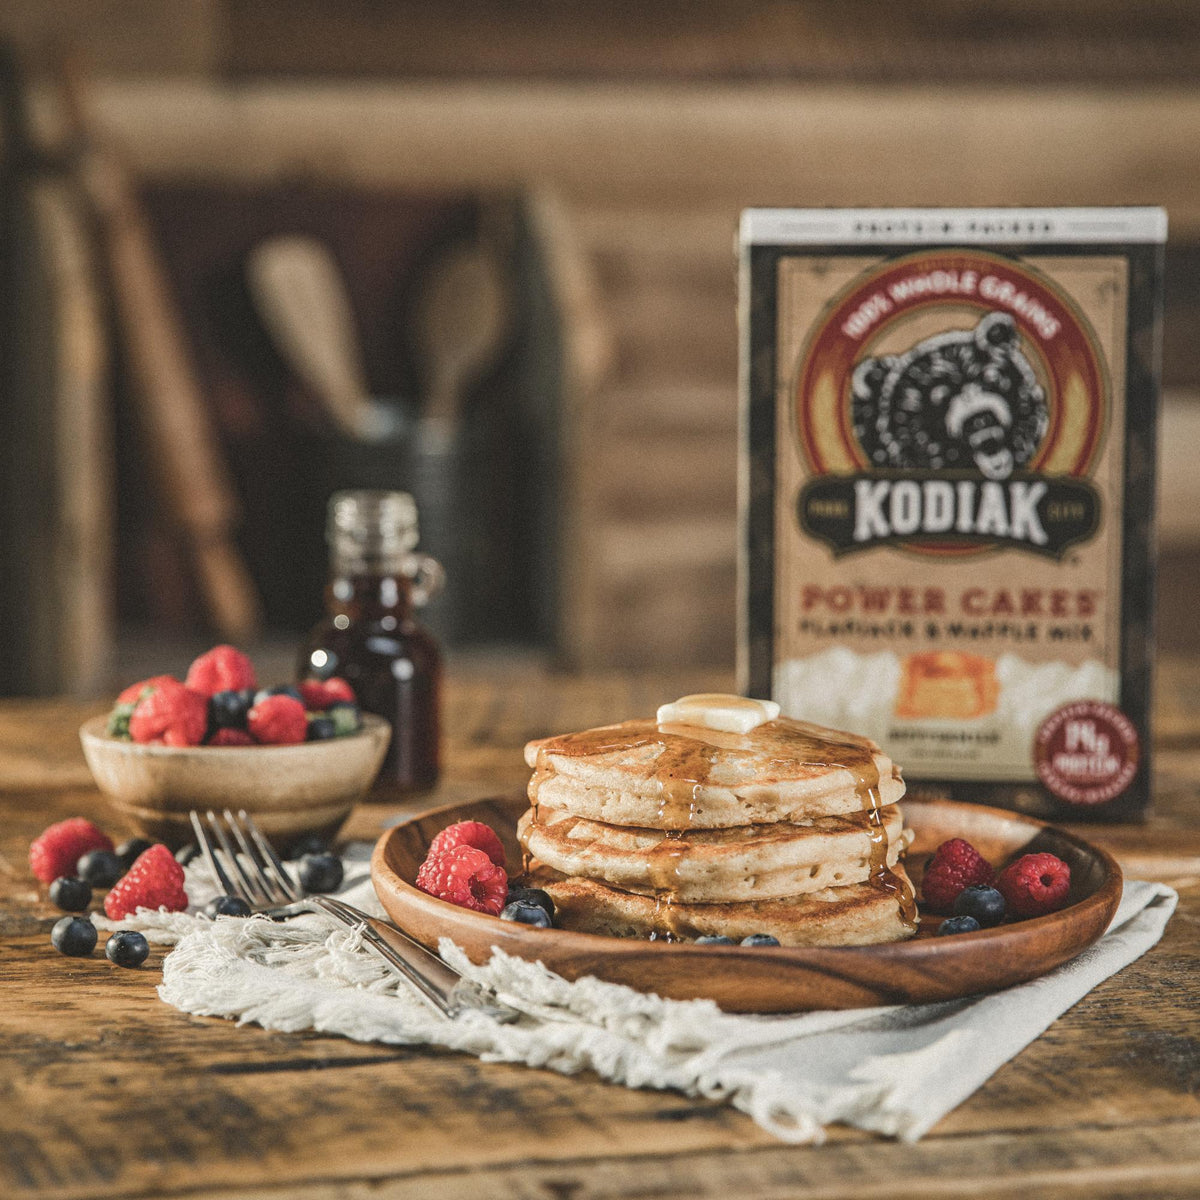 Kodiak Cakes's Power Cakes Mix is a Necessity for Busy Athletes